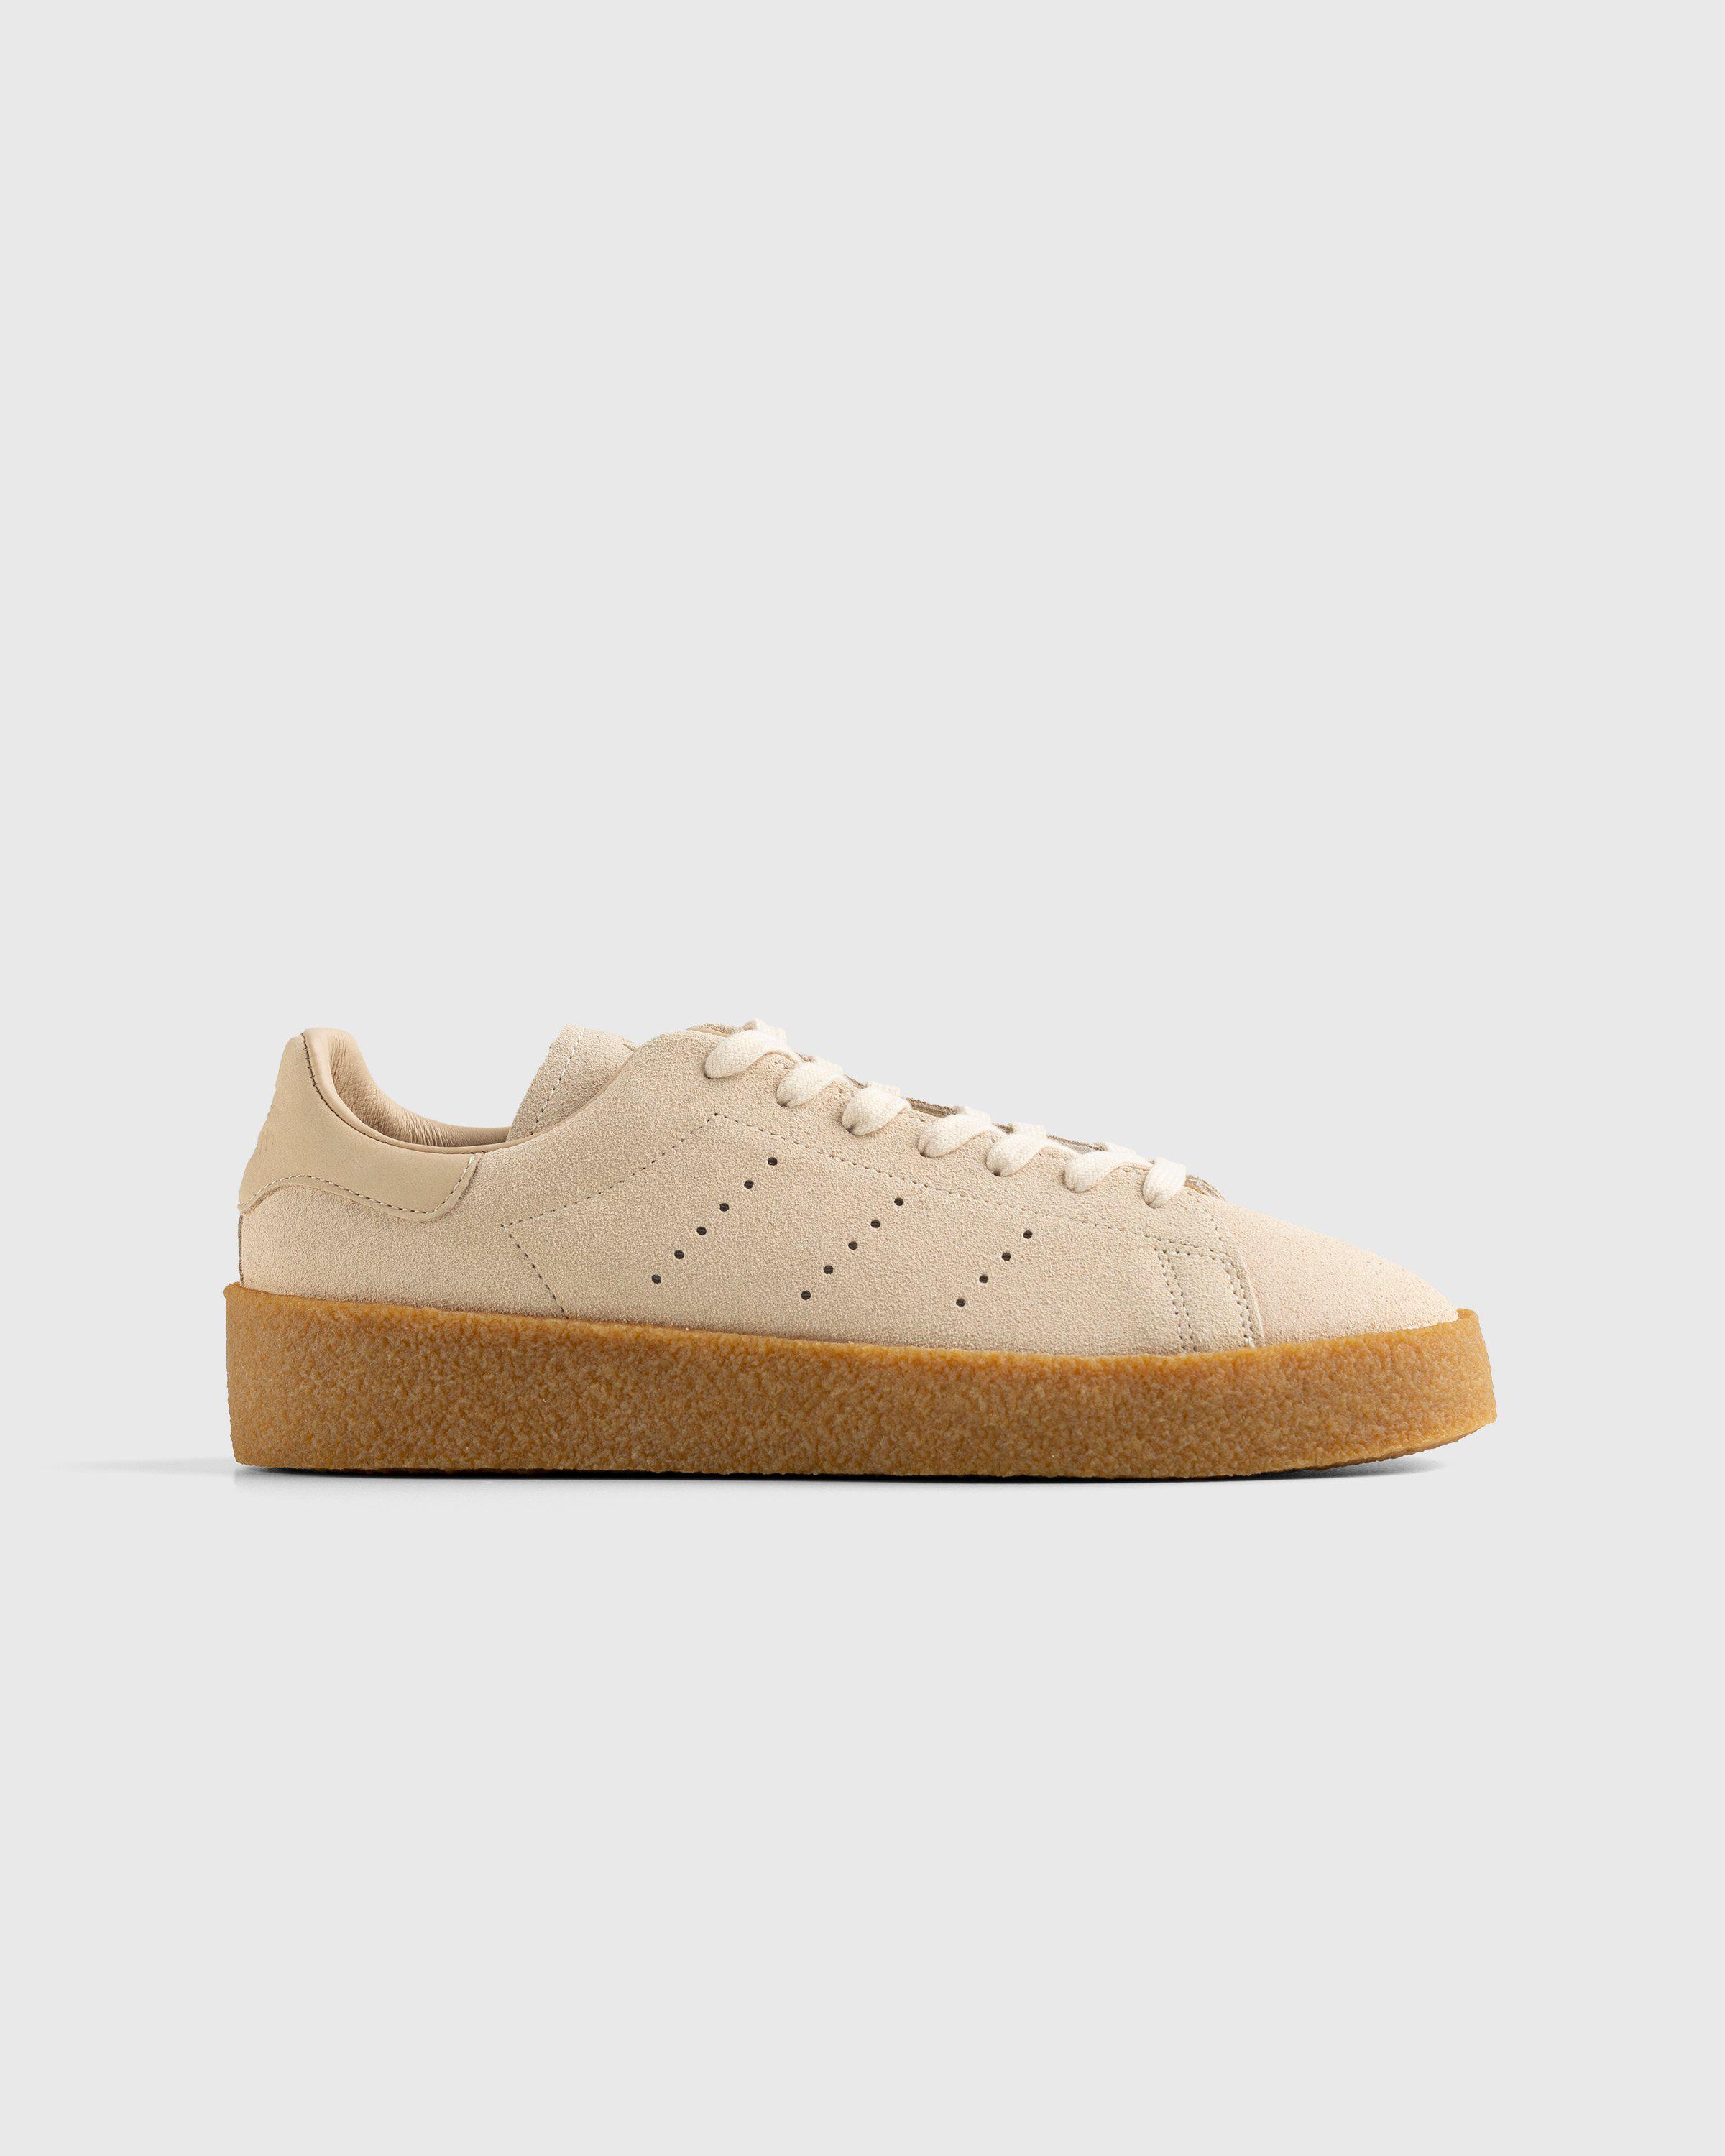 Adidas – Stan Smith Crepe Beige by ADIDAS